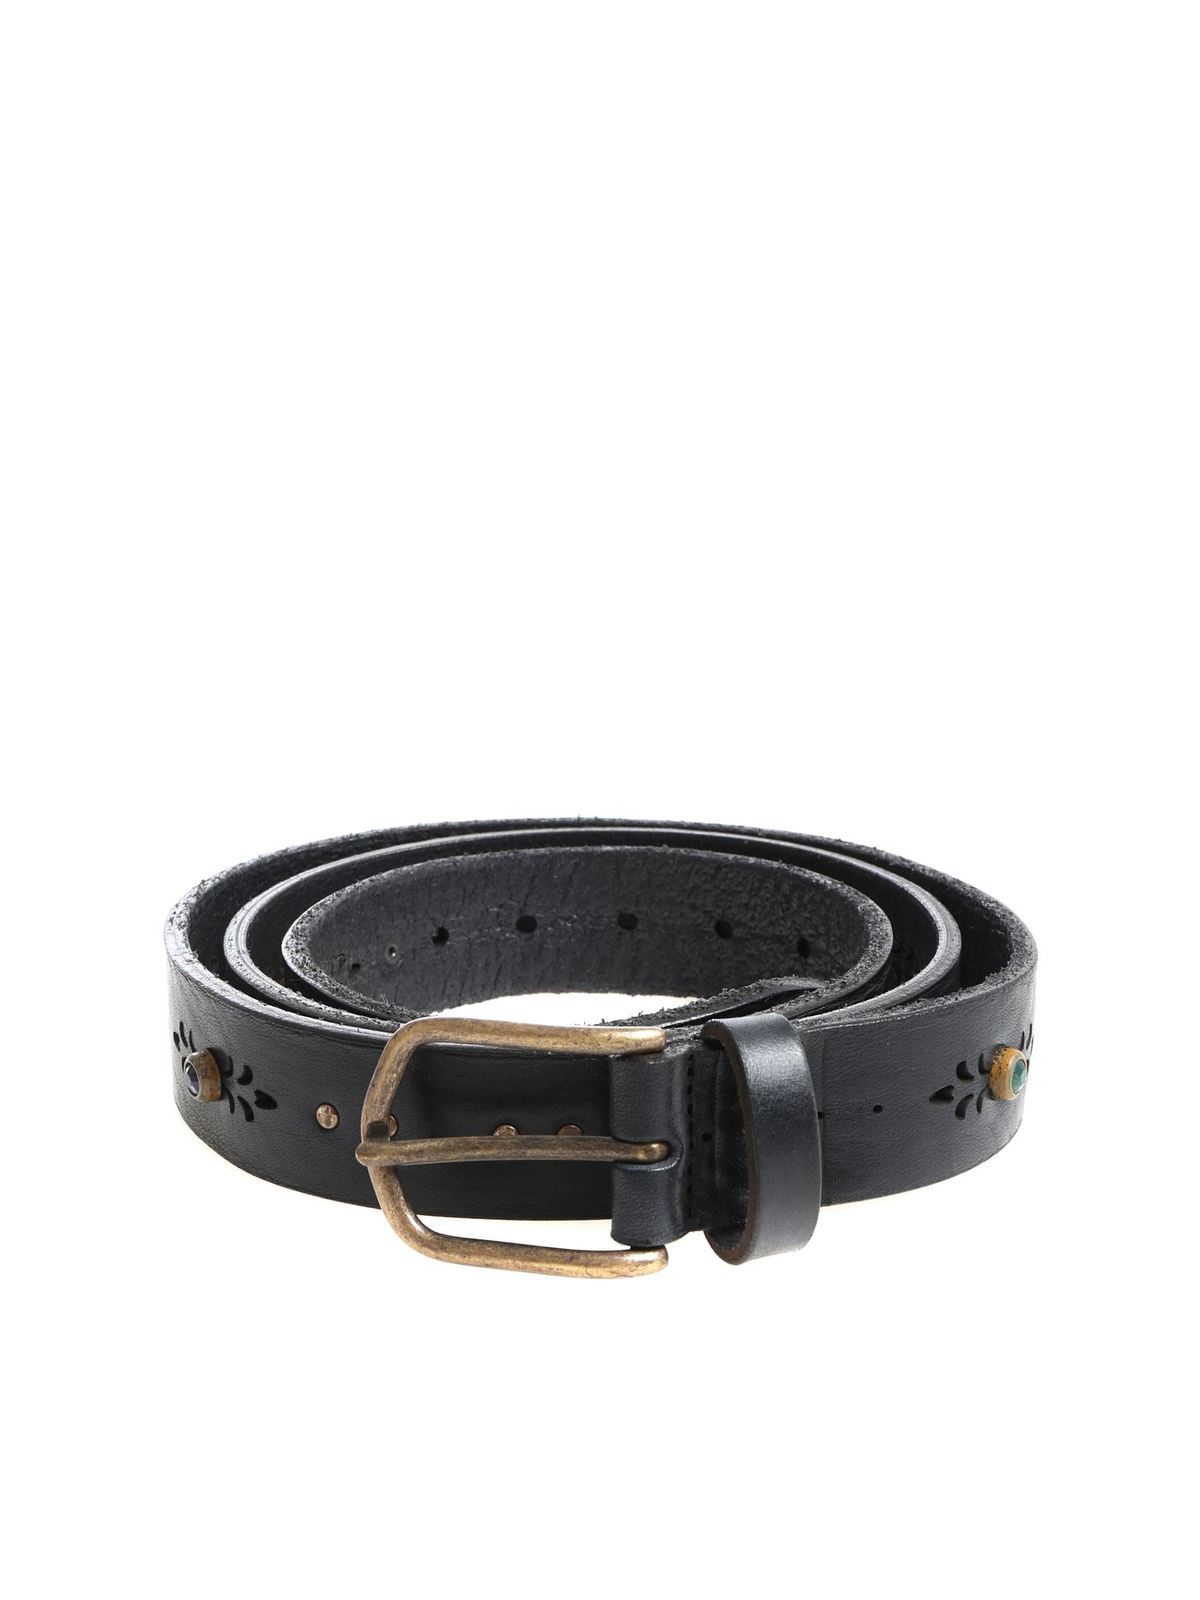 ANDREA D'AMICO STUDS DETAILED BELT